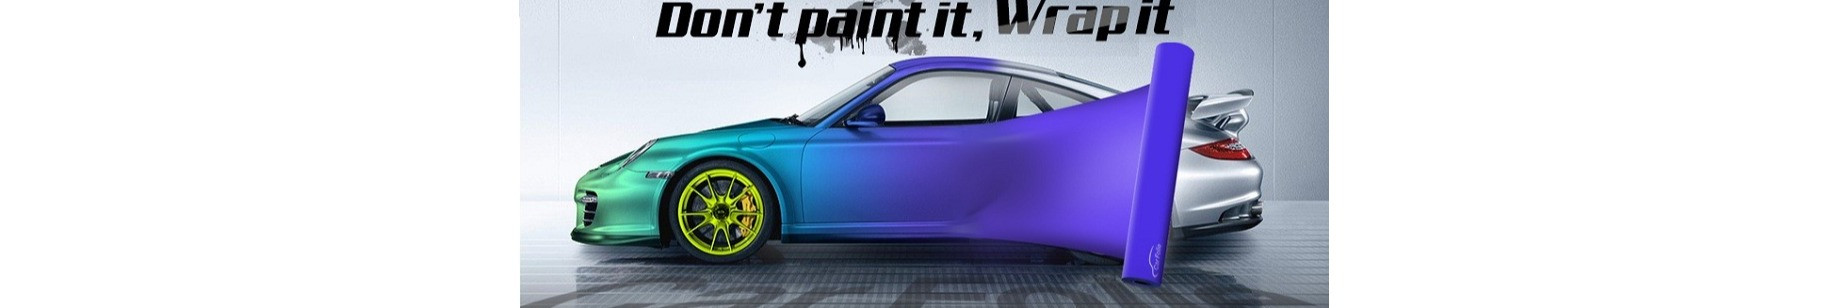 Car wrapping, design